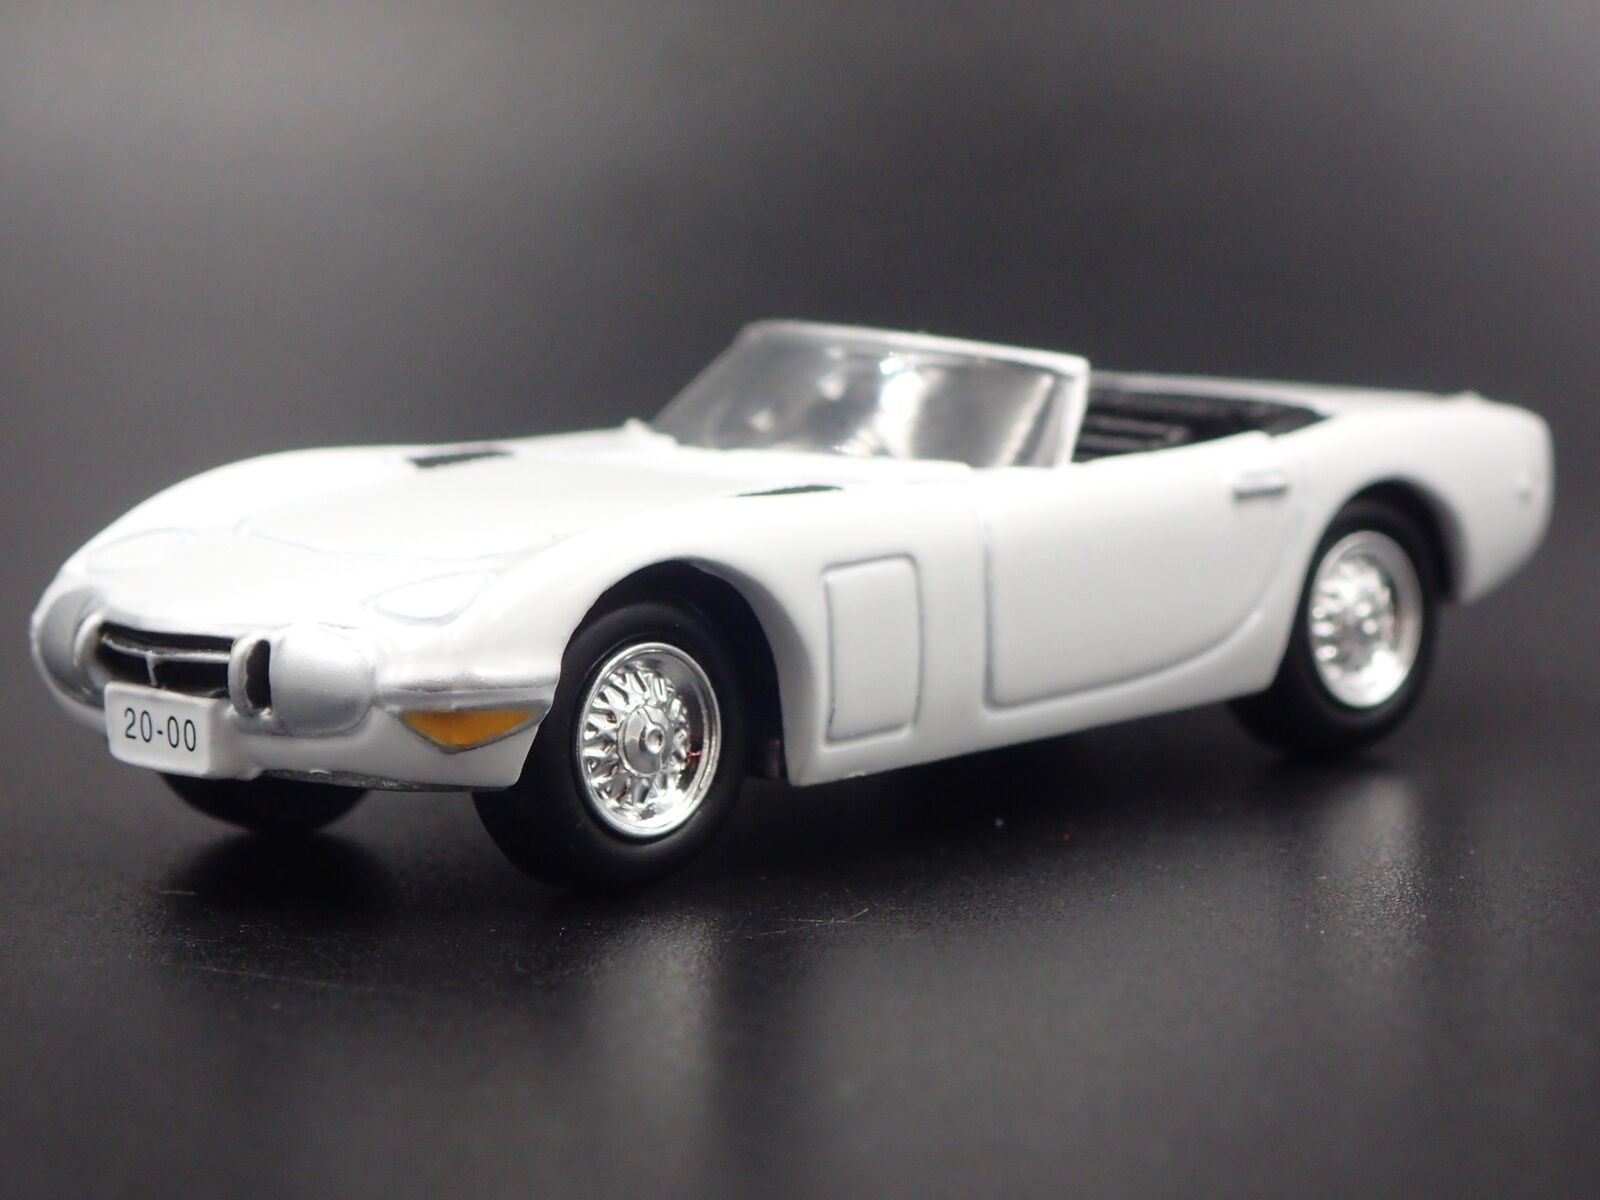 JAMES BOND 007 TOYOTA 2000GT ROADSTER 1:64 SCALE COLLECTIBLE DIECAST MODEL CAR